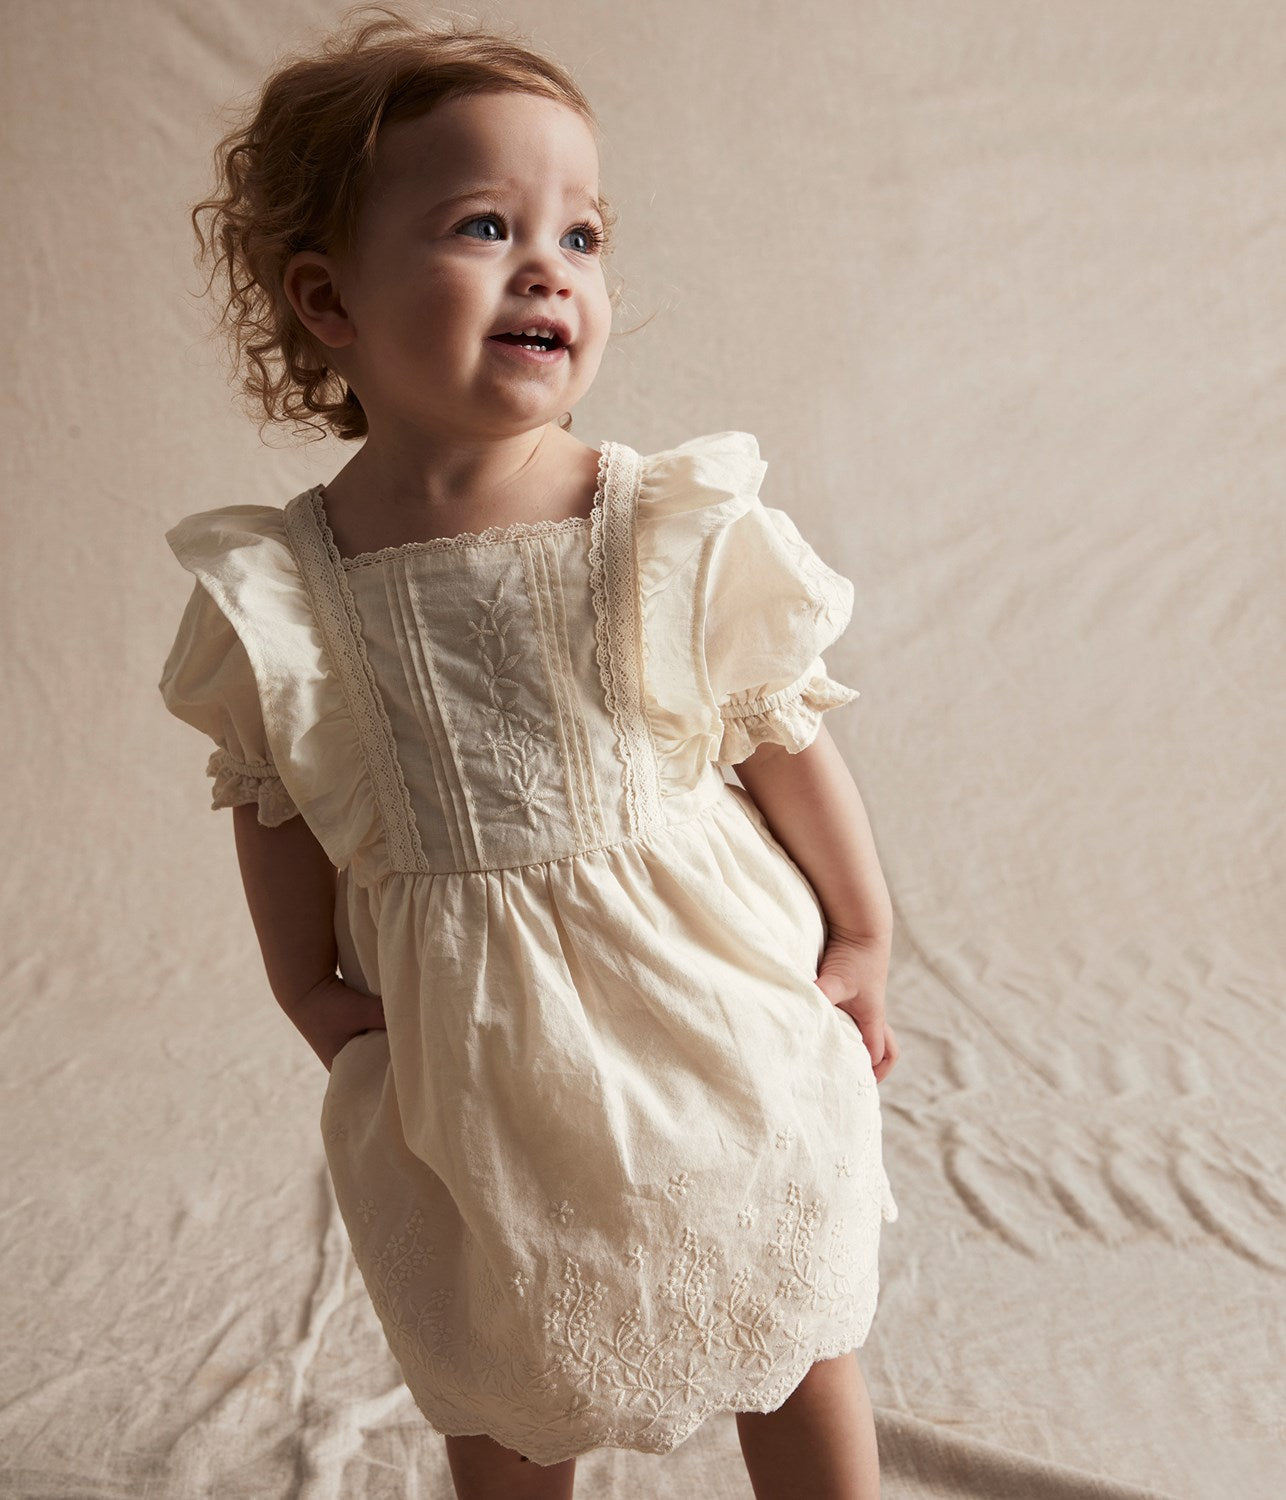 Baby white woven embroidery dress